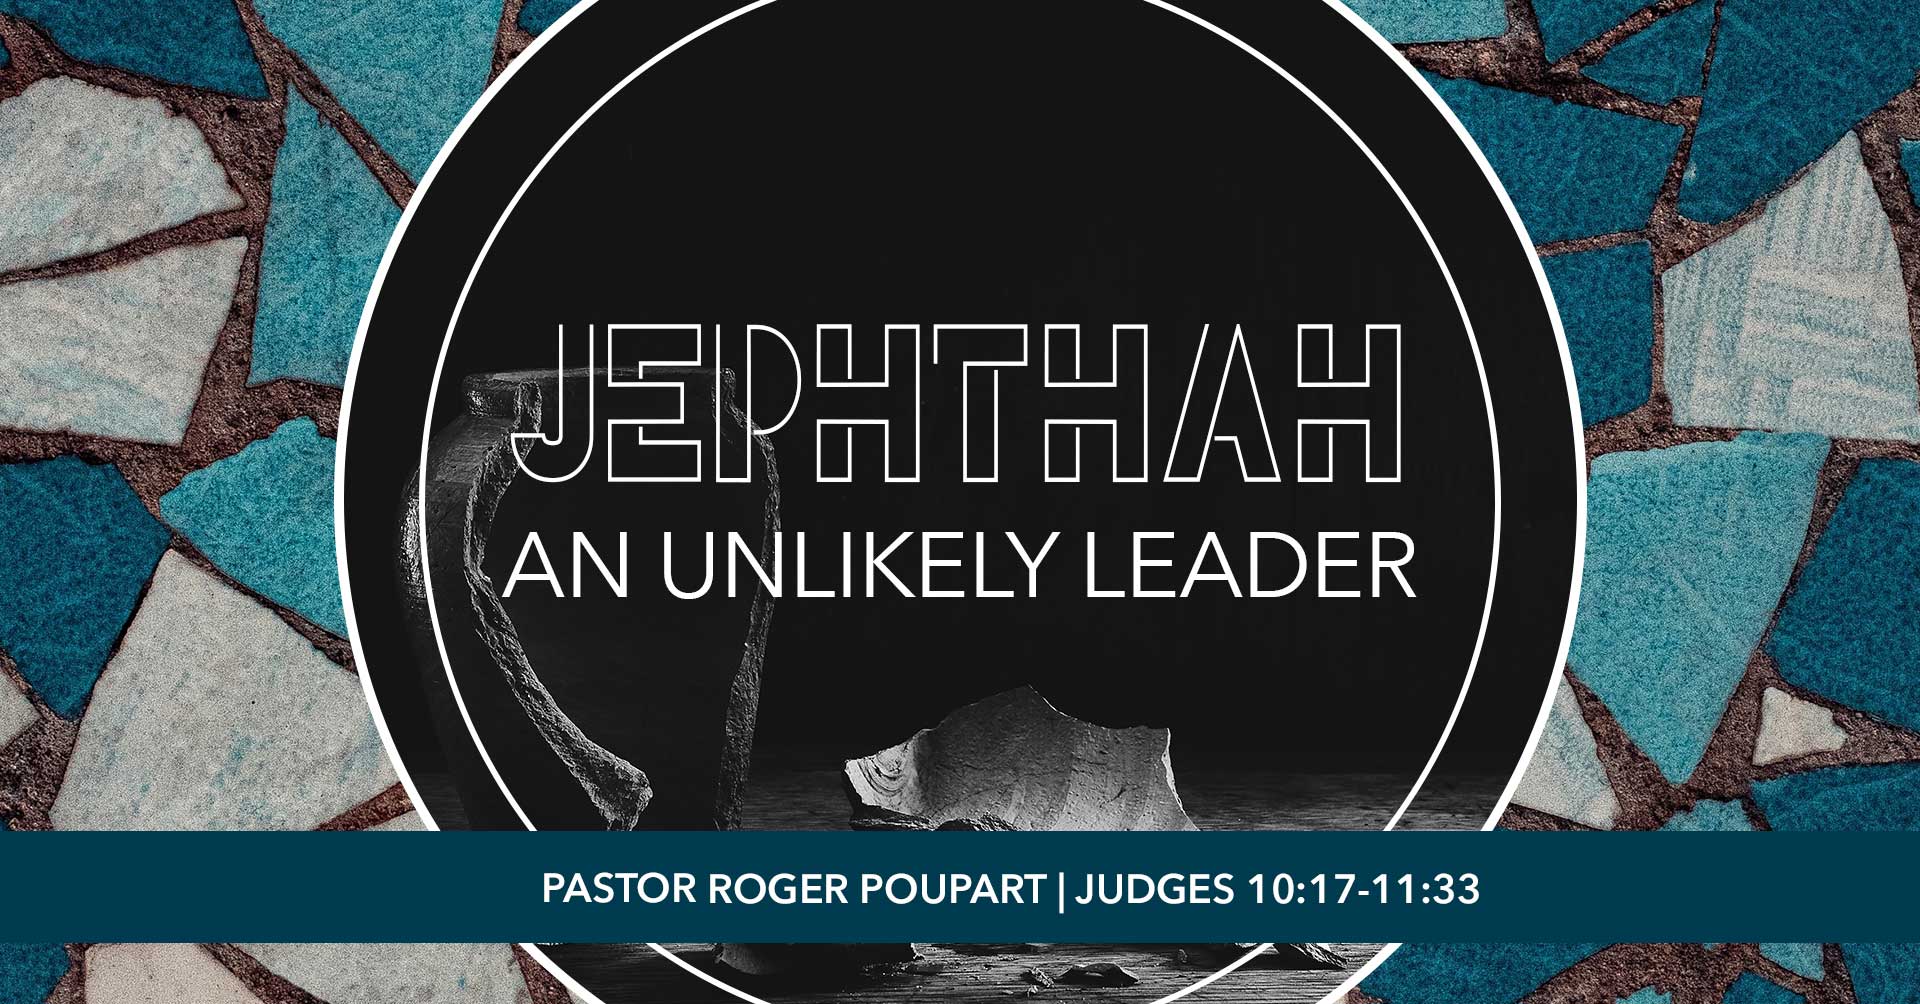 Jephthah: An Unlikely Leader